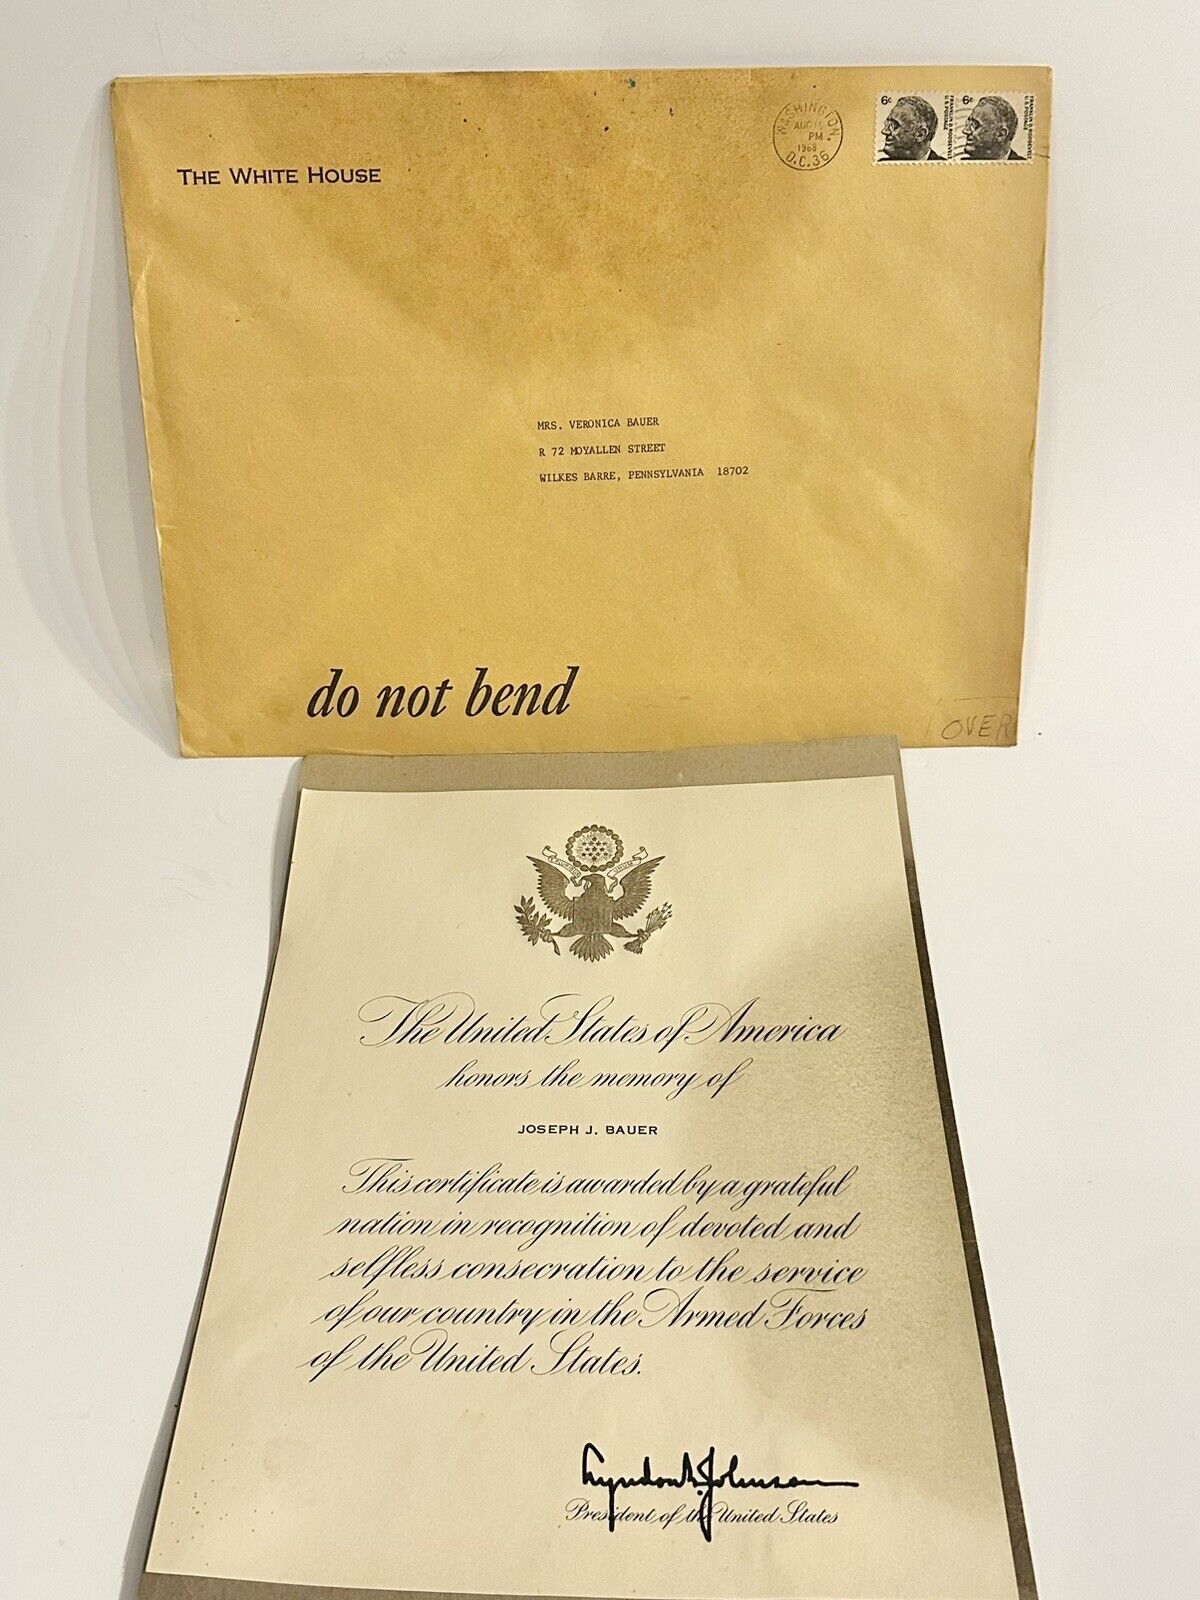 Lyndon B Johnson Official Letter  From The White Hosue With Original Envelope